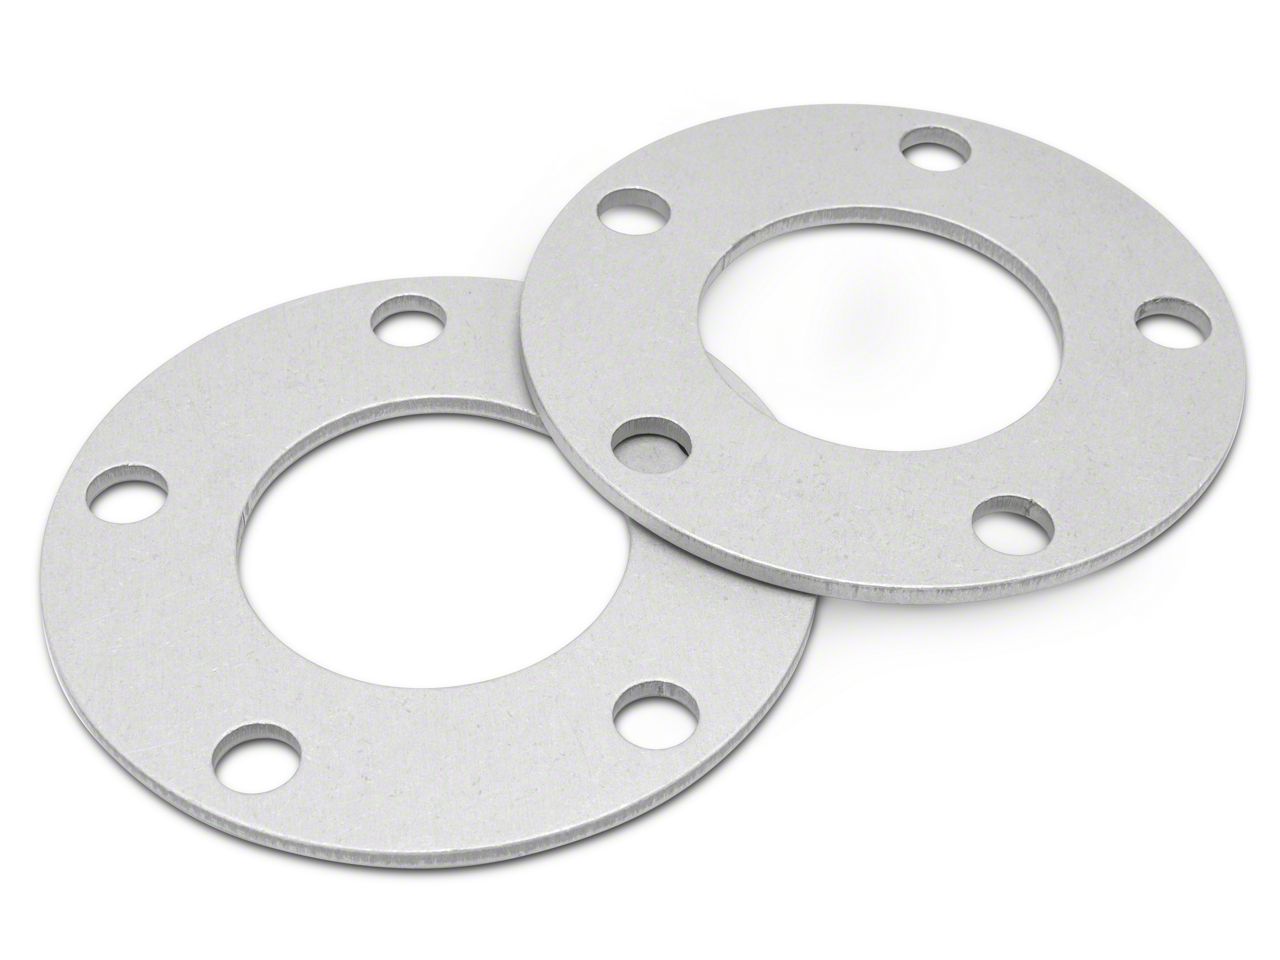 Eibach Mustang 5mm Pro-Spacer Hubcentric Wheel Spacers S90-1-05